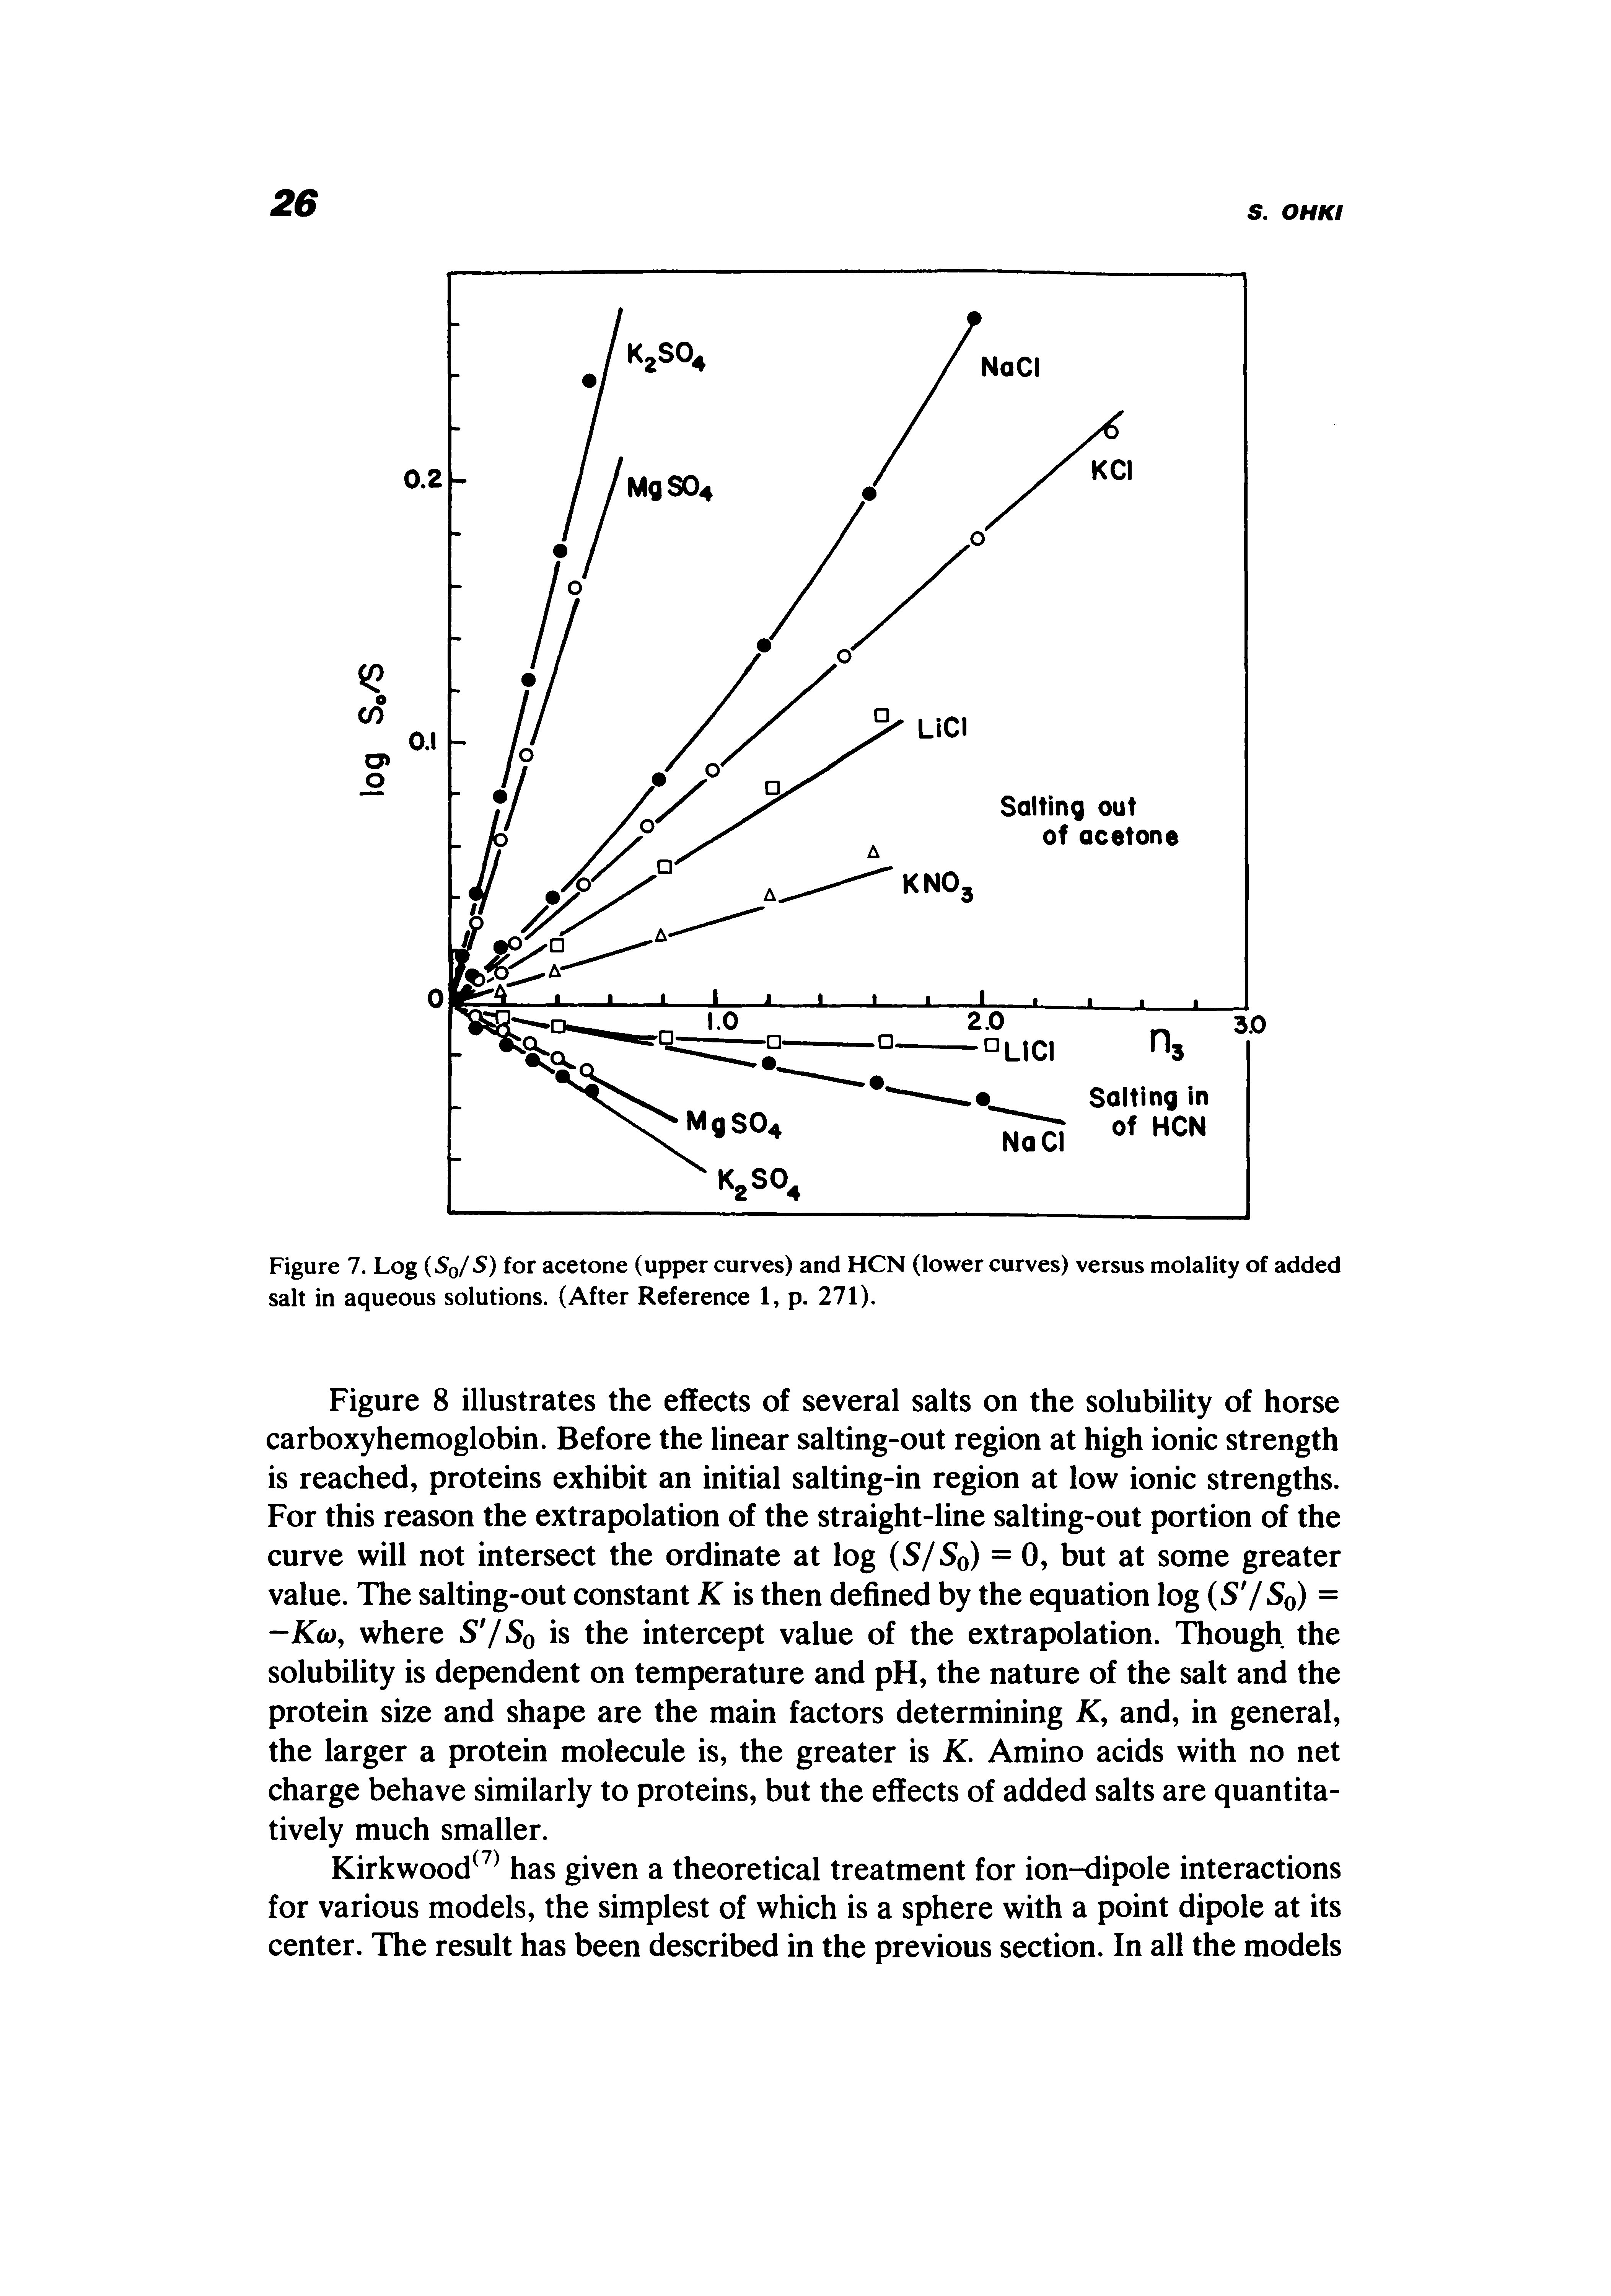 Figure 7. Log (Sq/S) for acetone (upper curves) and HCN (lower curves) versus molality of added salt in aqueous solutions. (After Reference 1, p. 271).